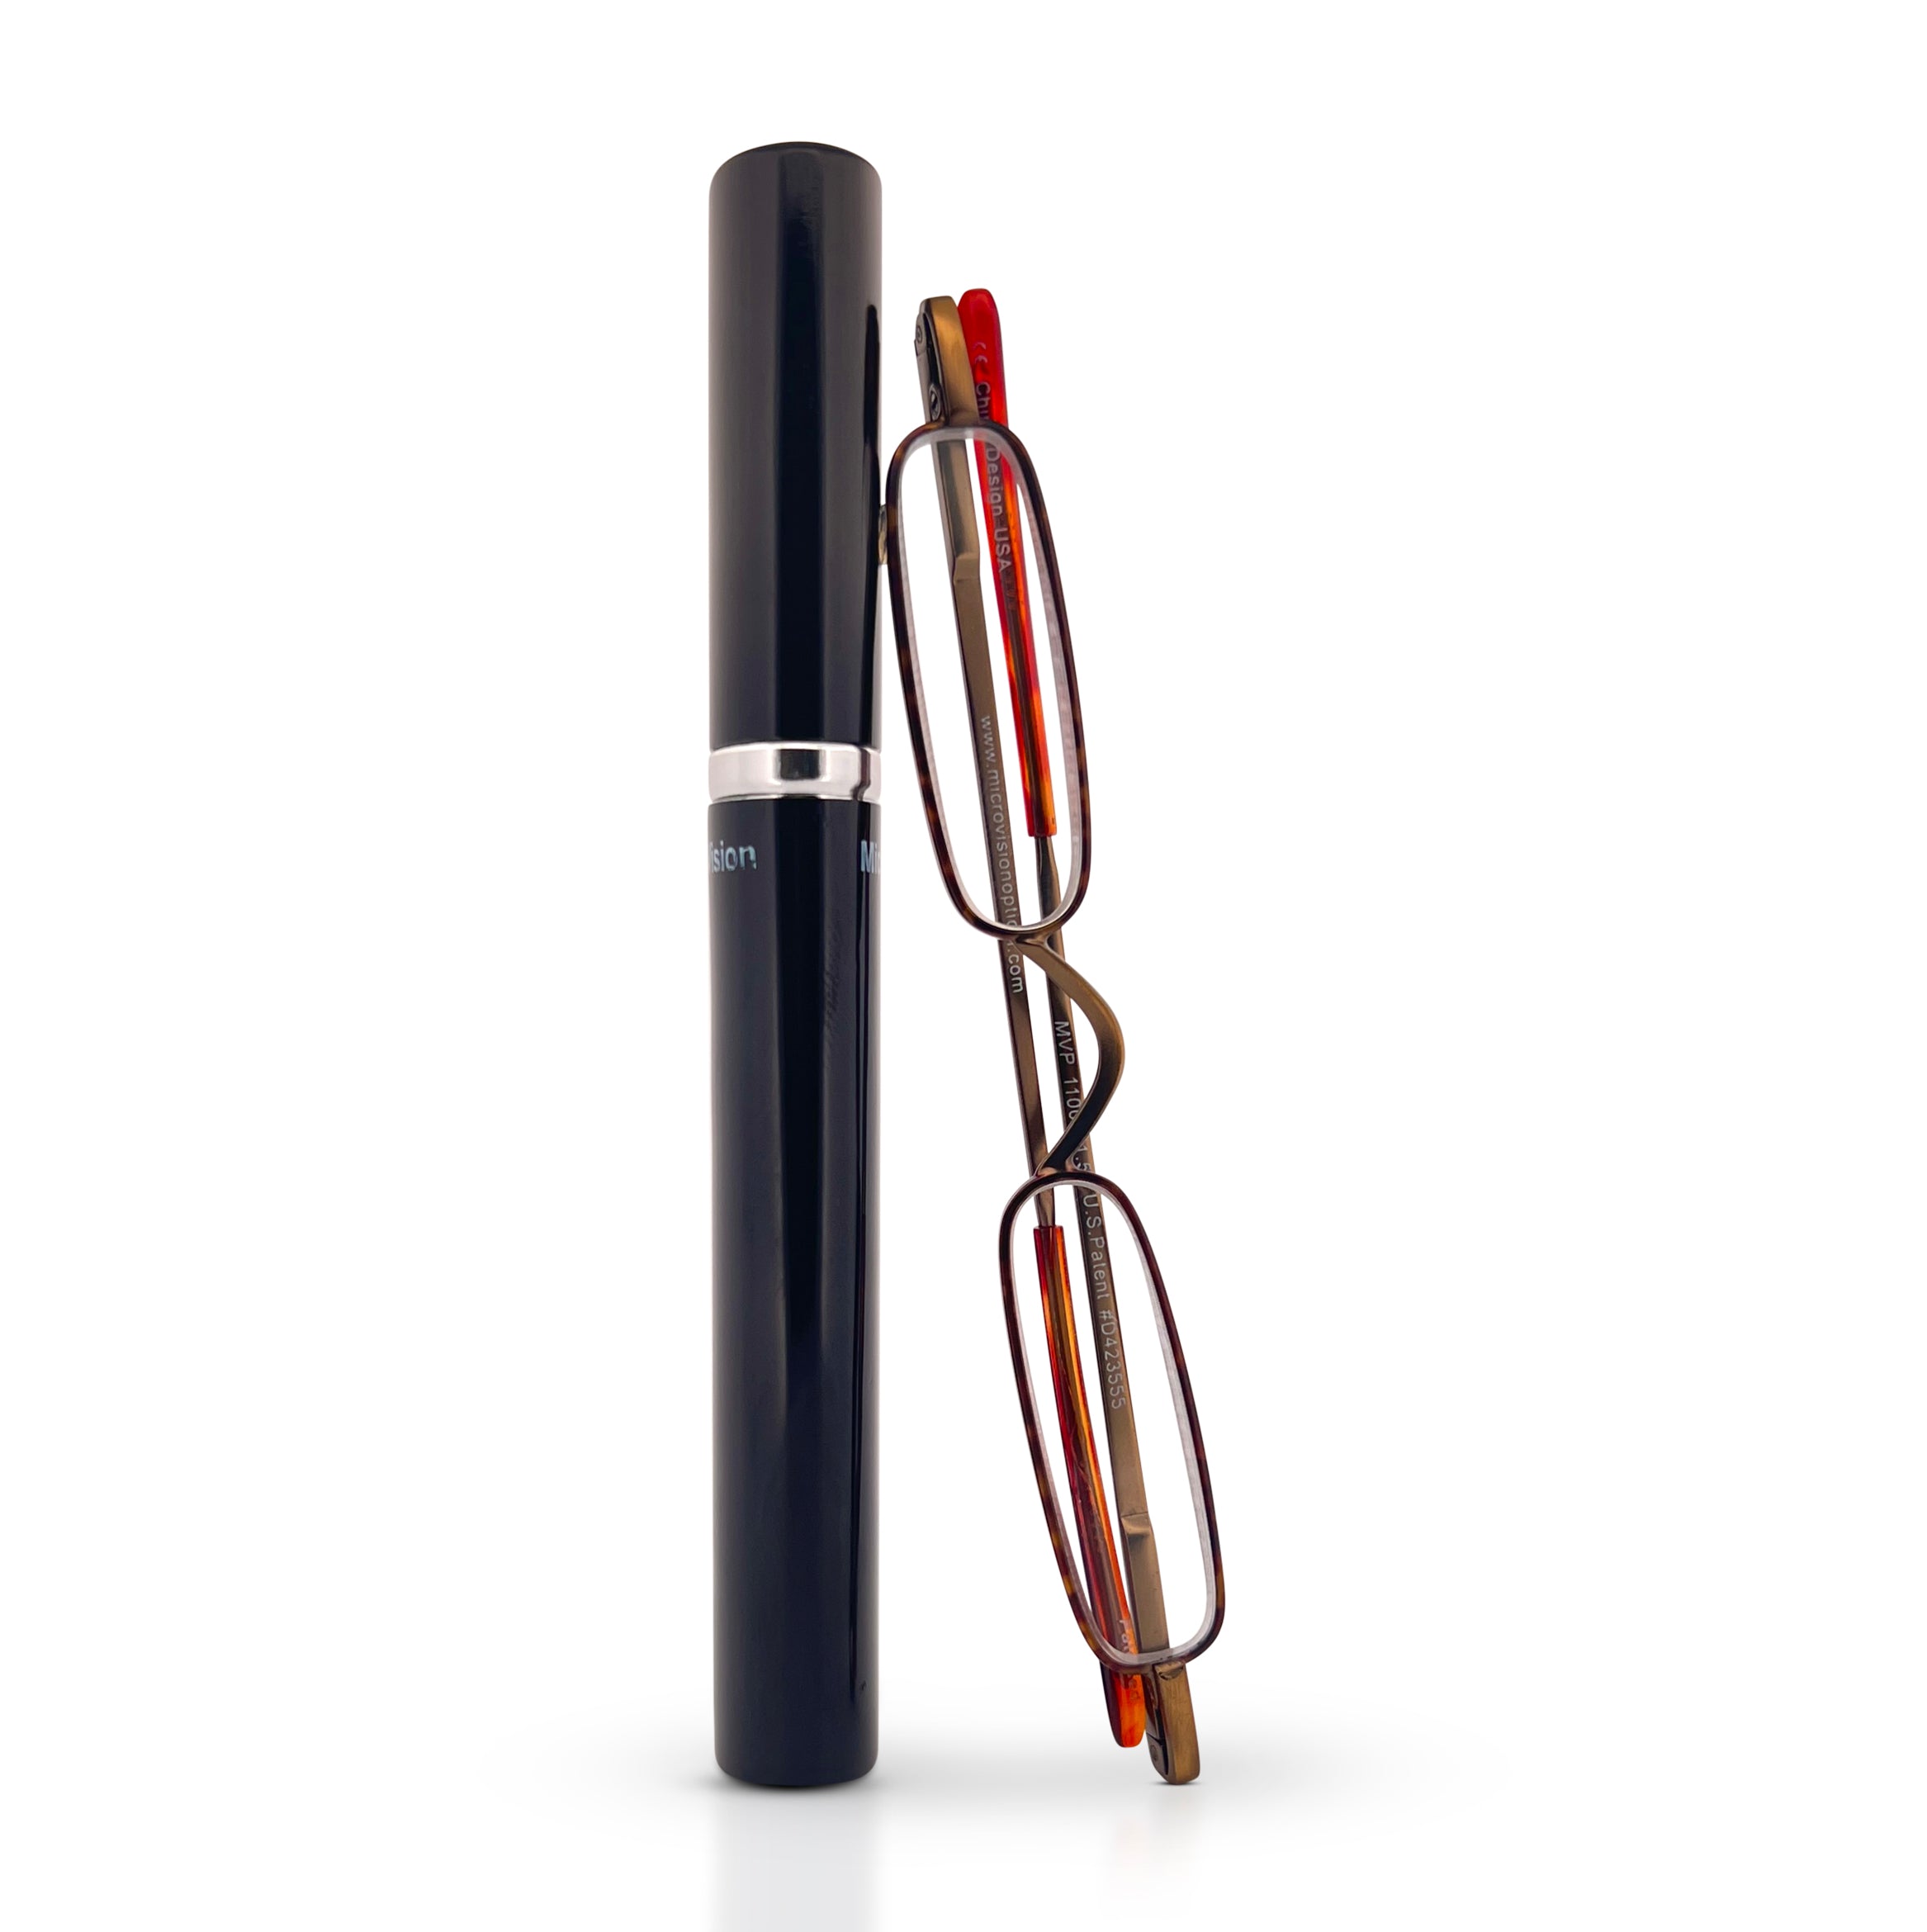 Tortoise sleek, compact, patented, stainless steel, original mini readers perfect for on the go